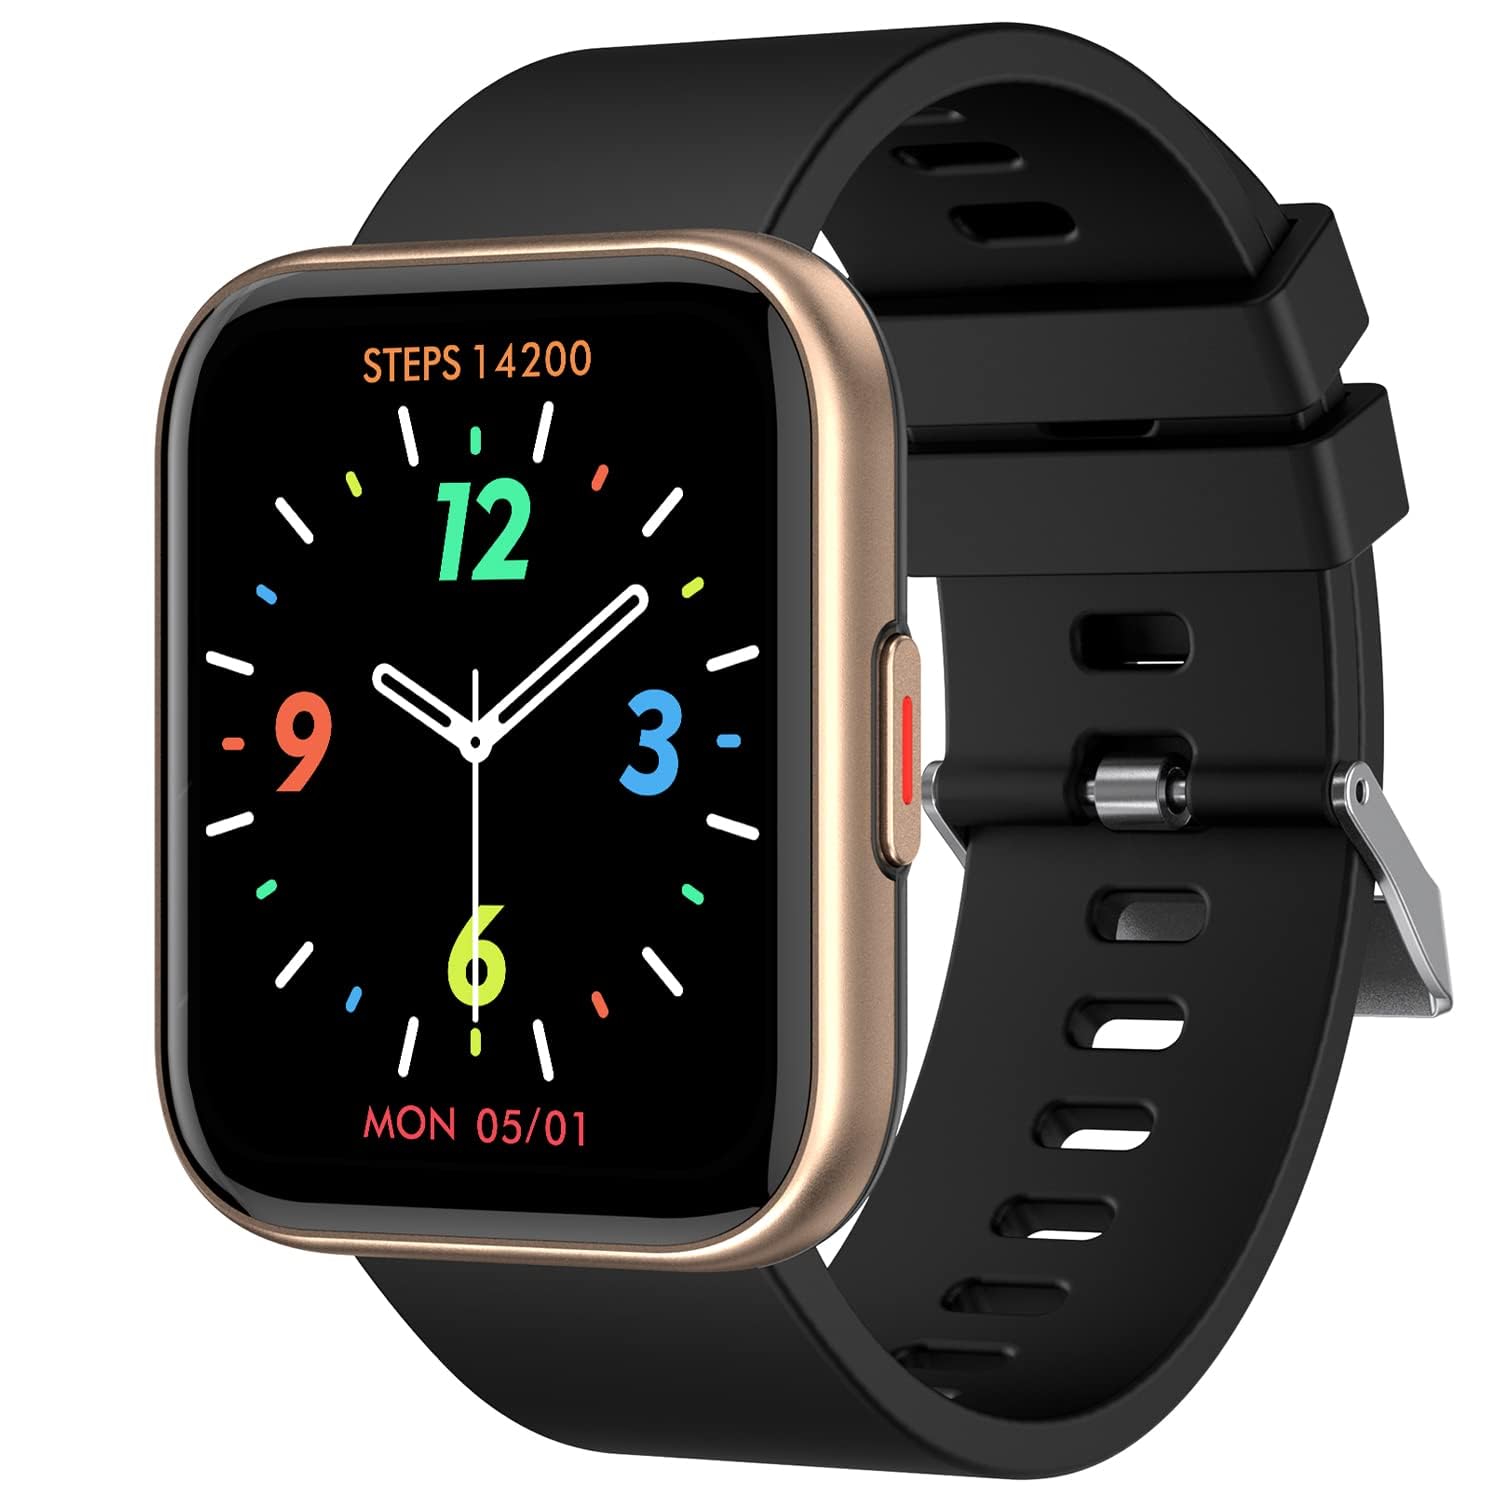 Fire-Boltt Astro 1.78" AMOLED Display Smartwatch, Always On Display, Bluetooth Calling with AI Voice, 110+ Sports Modes, Rotating Button Technology, High Resolution of 368*448 Pixels, Silver